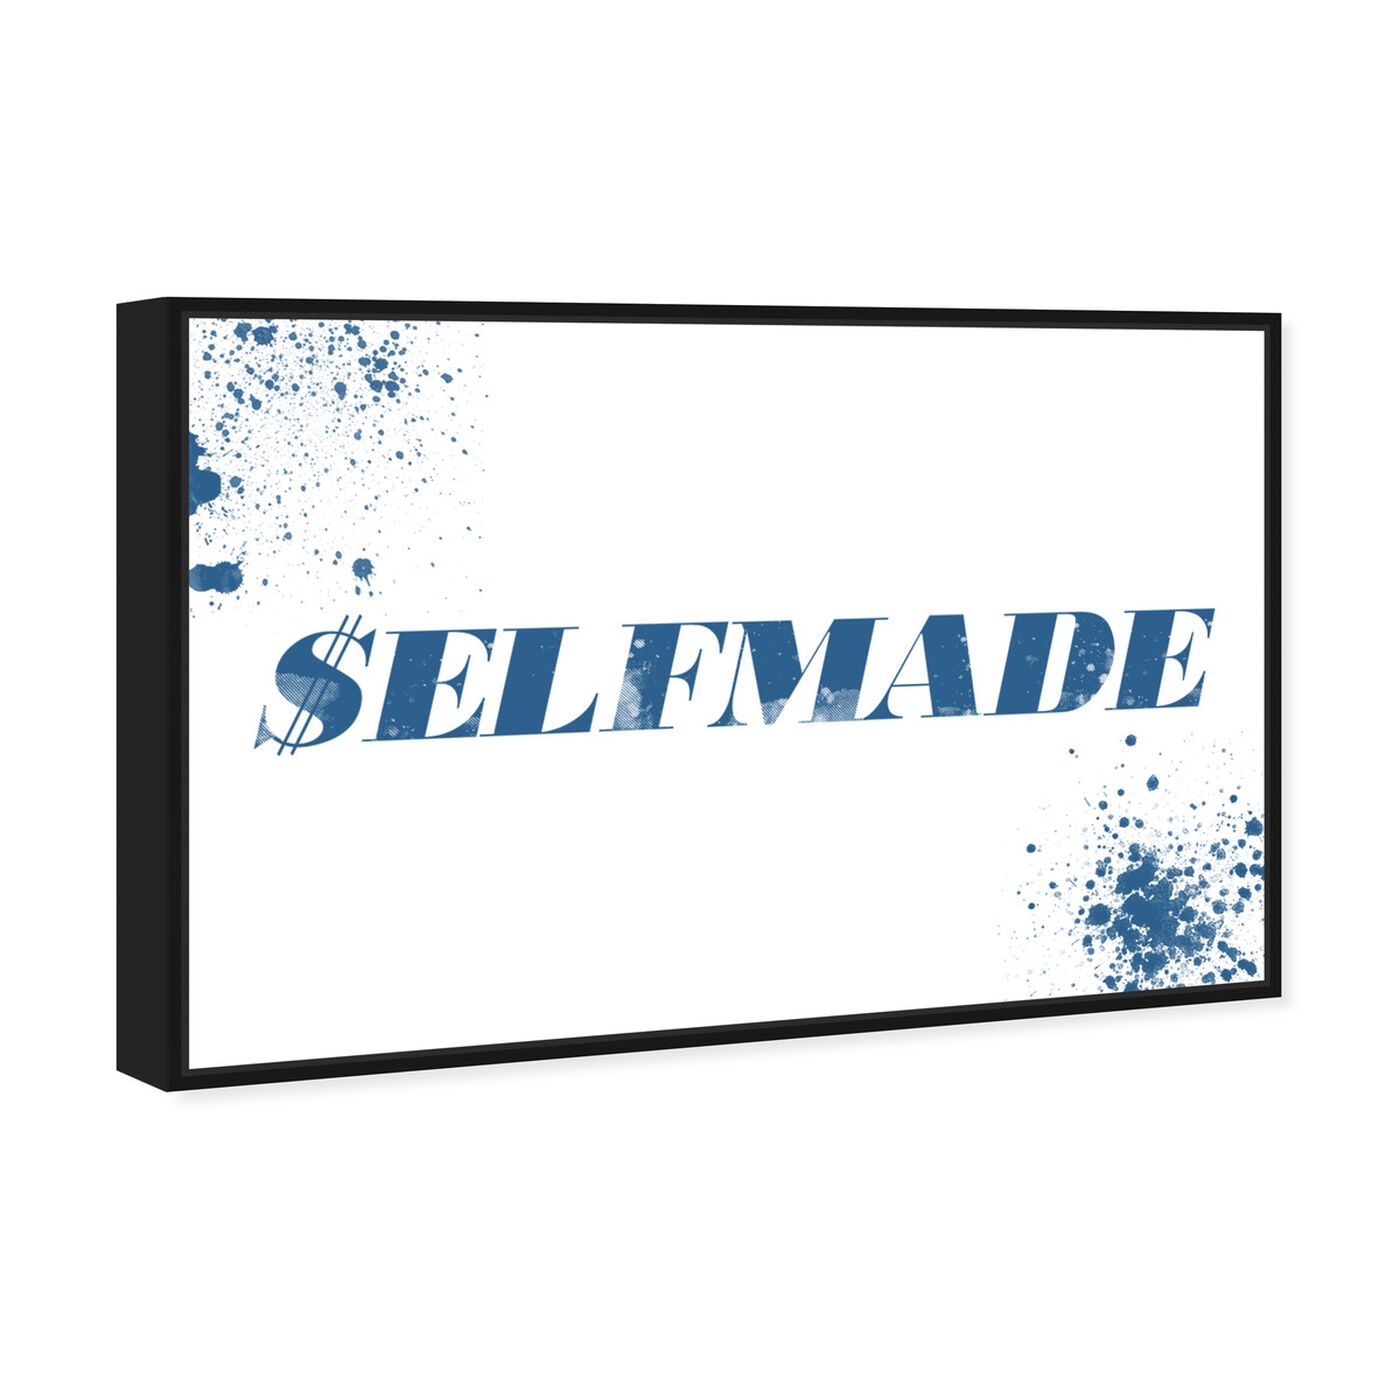 Angled view of $elfmade featuring typography and quotes and quotes and sayings art.